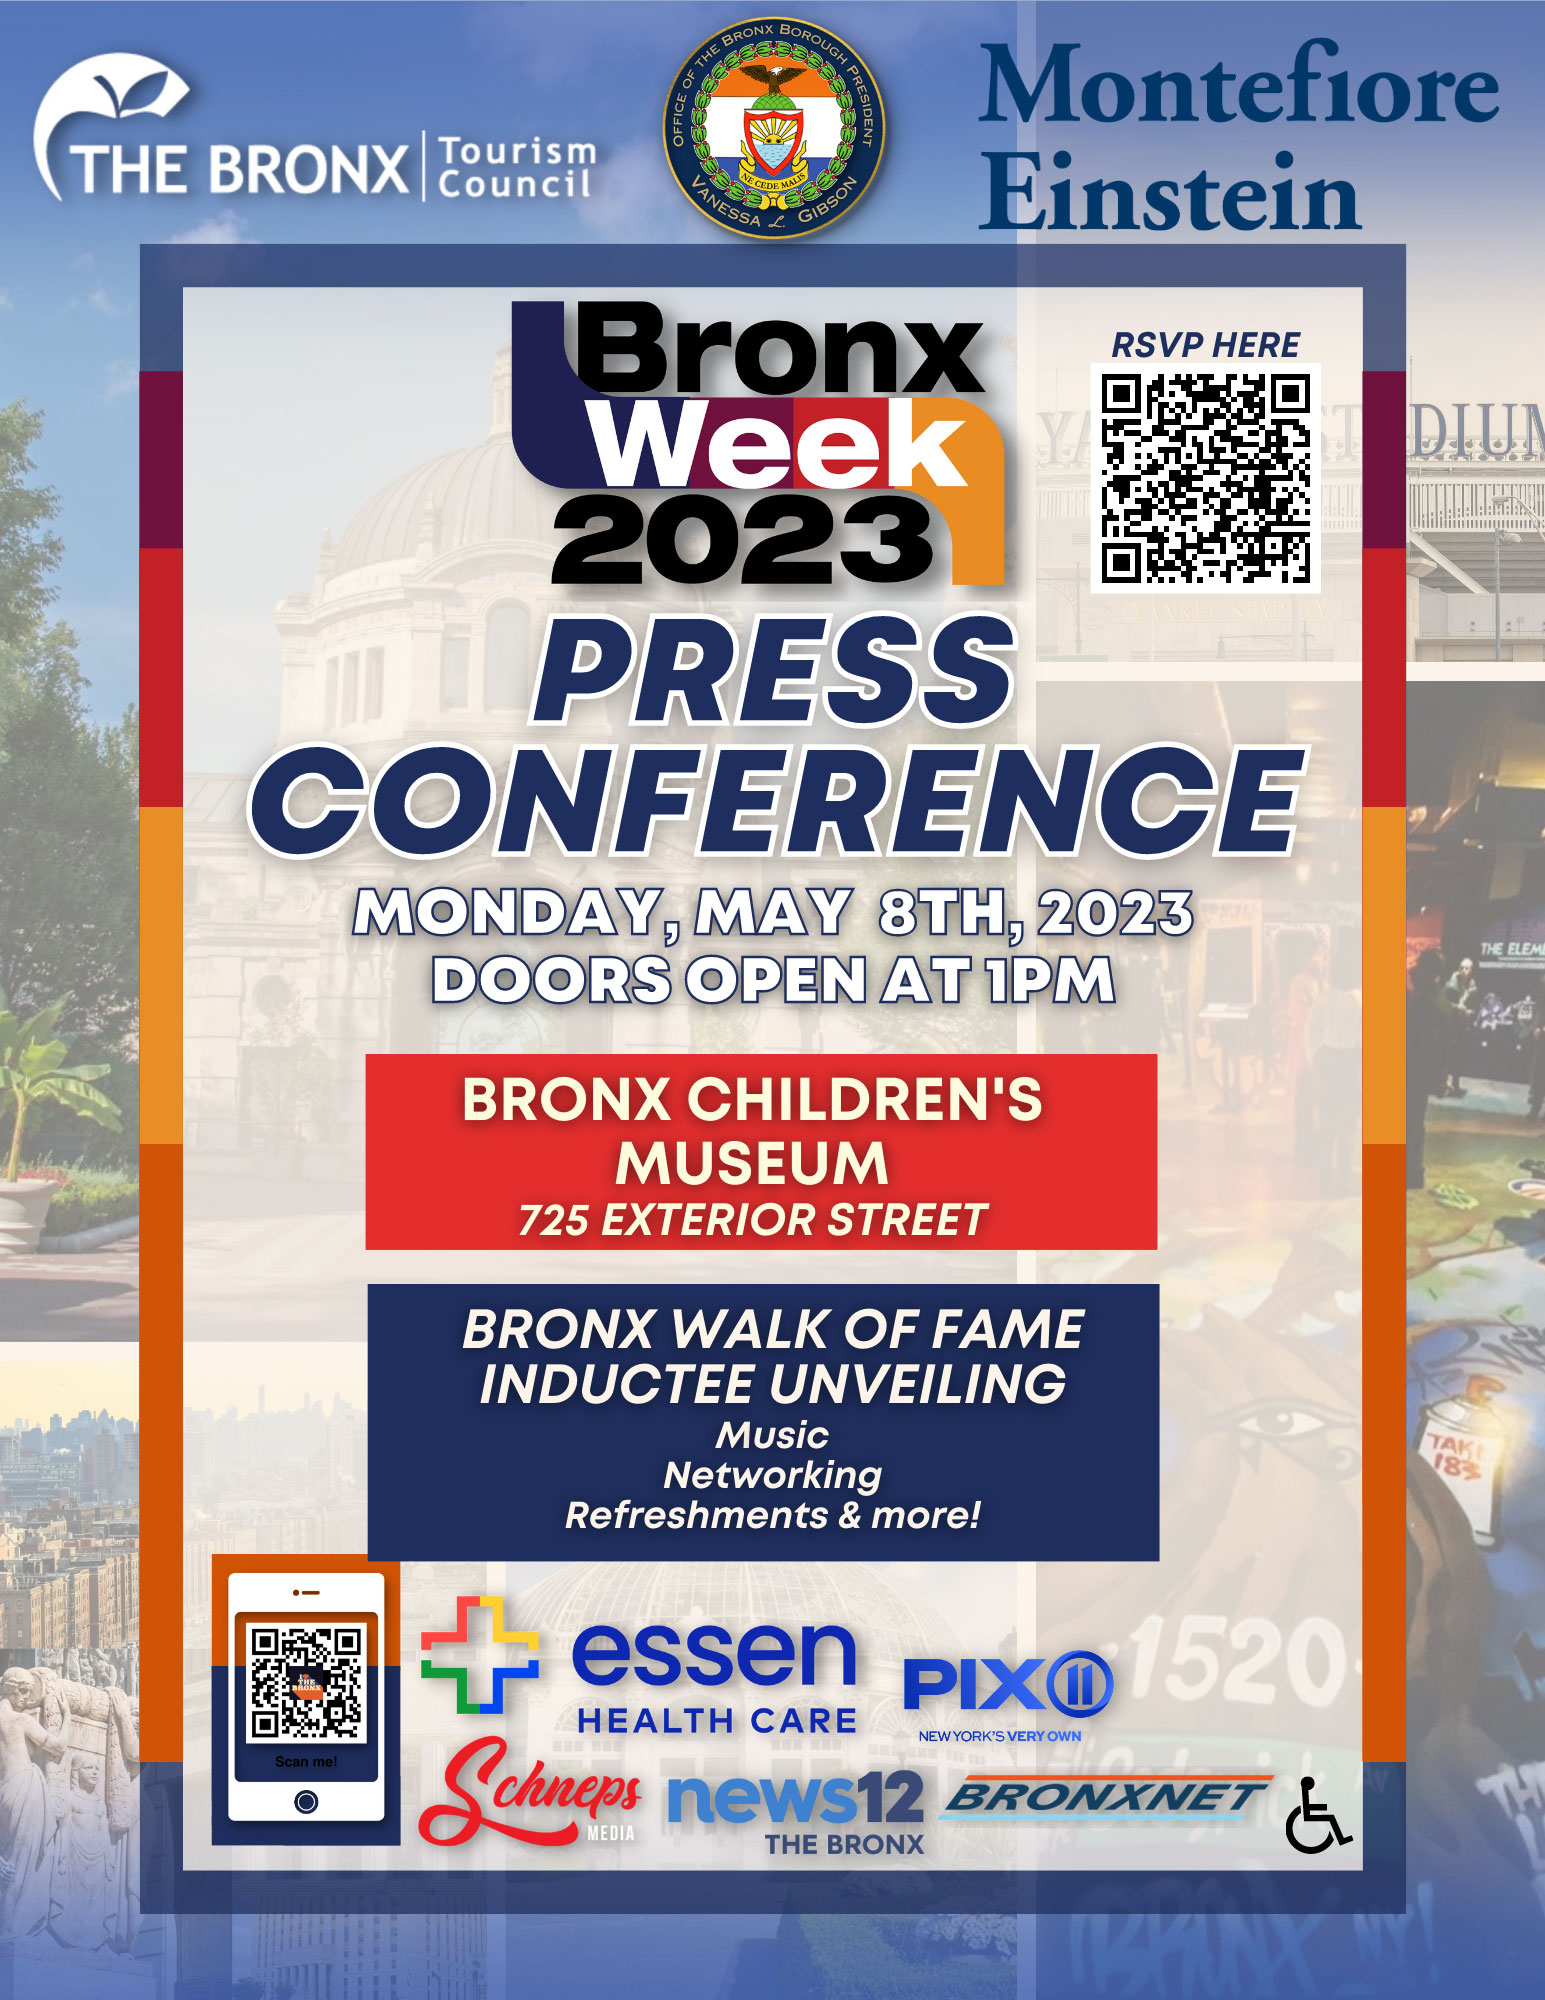 Flyer for the Bronx Week 2023 Press Conference